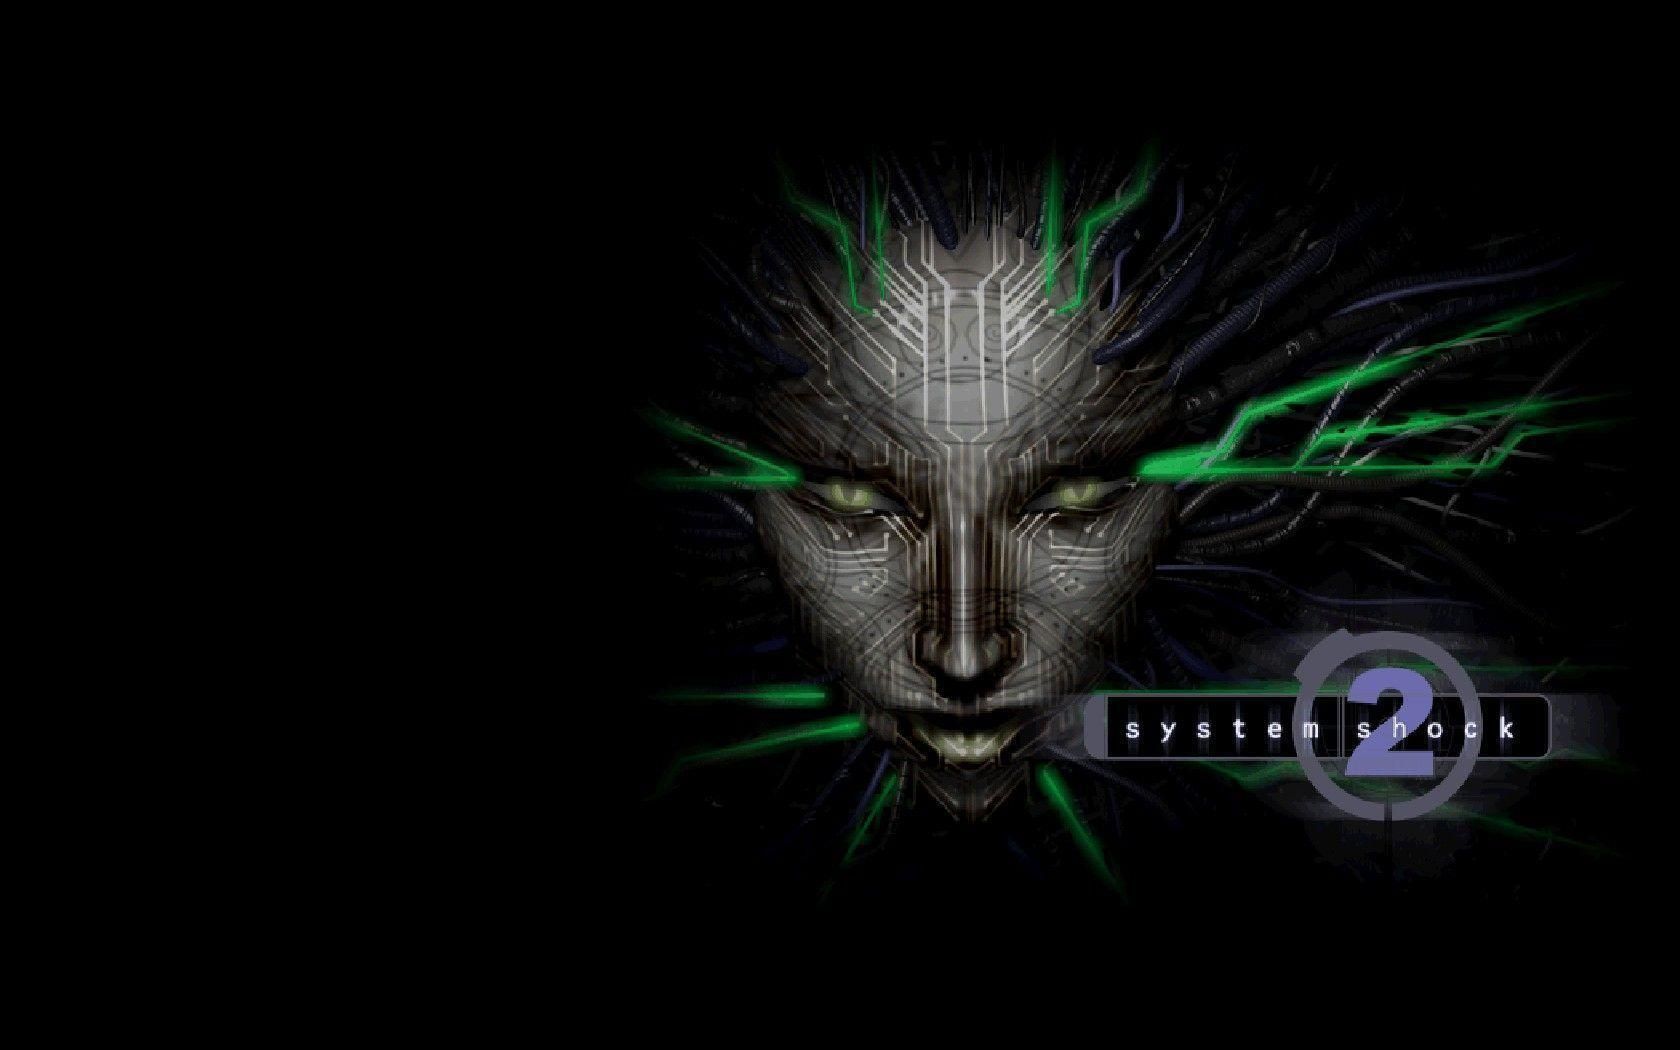 System Shock Wallpapers - Top Free System Shock Backgrounds ...